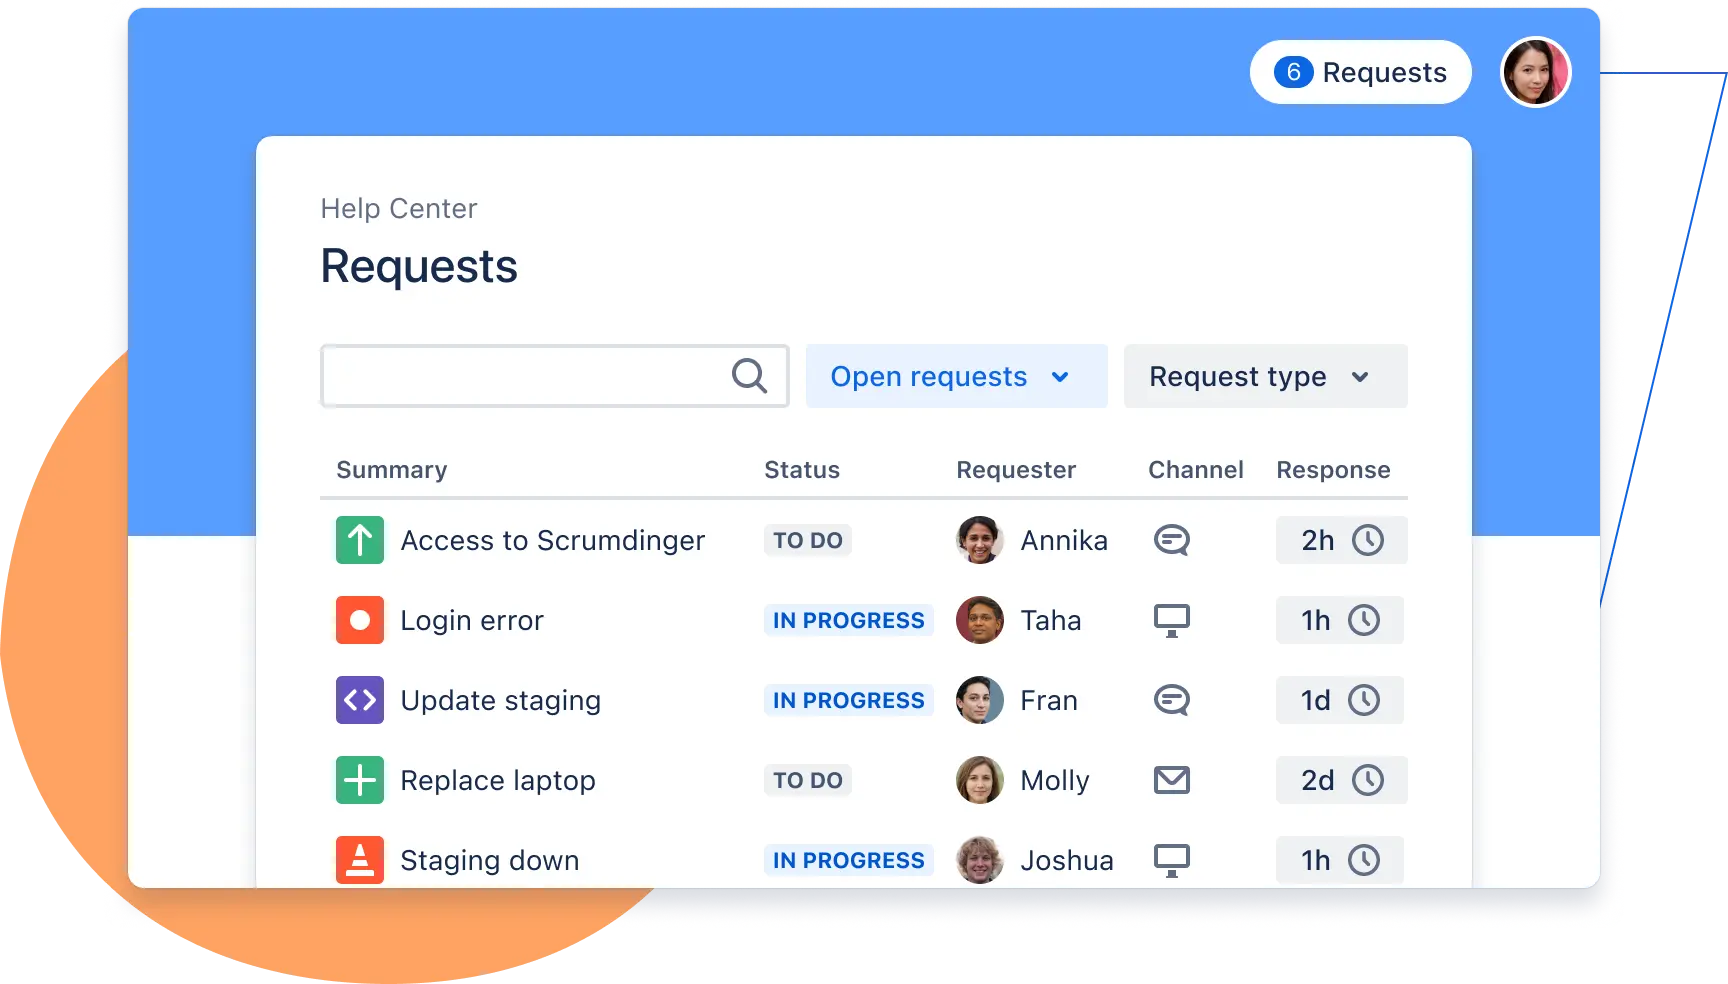 Jira Service Management help center with 5 requests from employees that are in progress or to do.